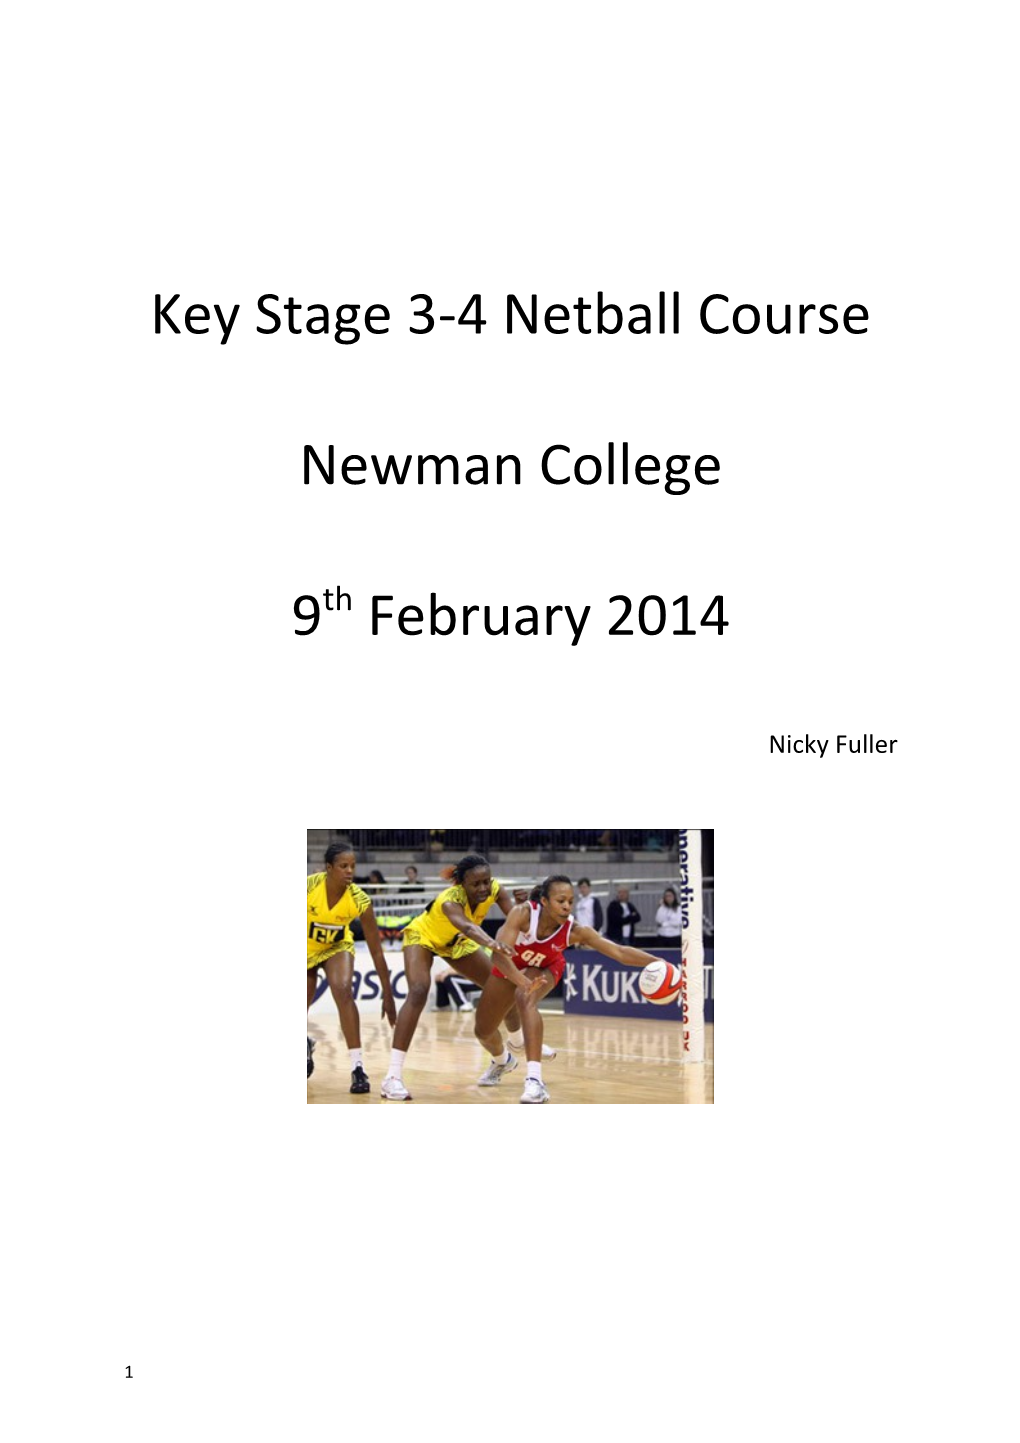 Key Stage 3-4 Netball Course